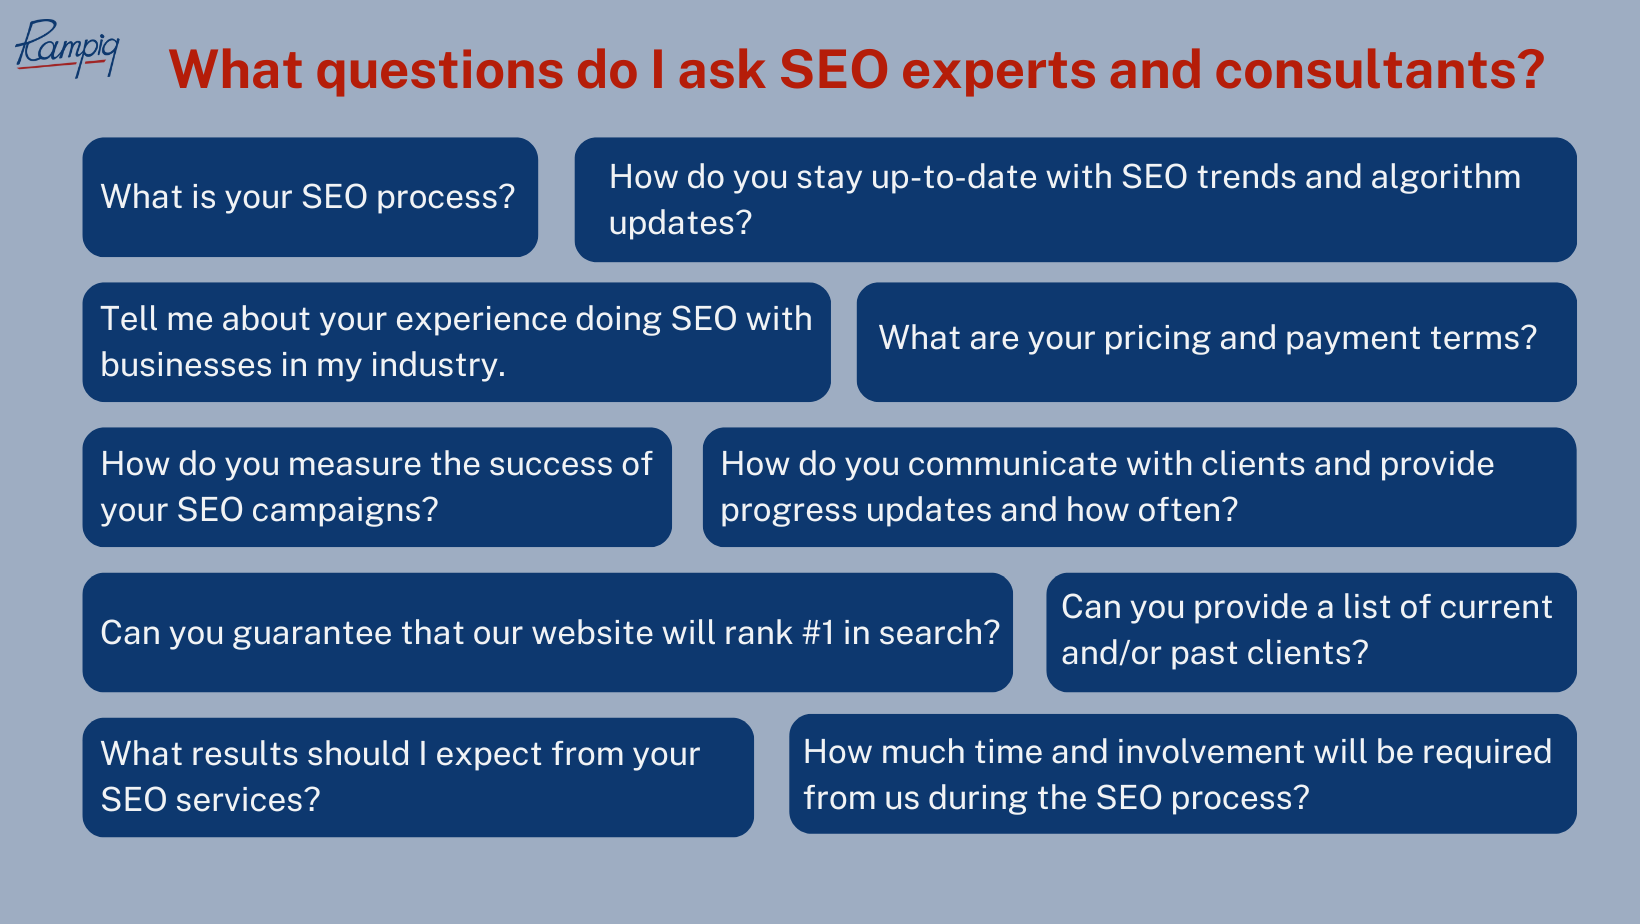 What questions do I ask SEO experts and consultants